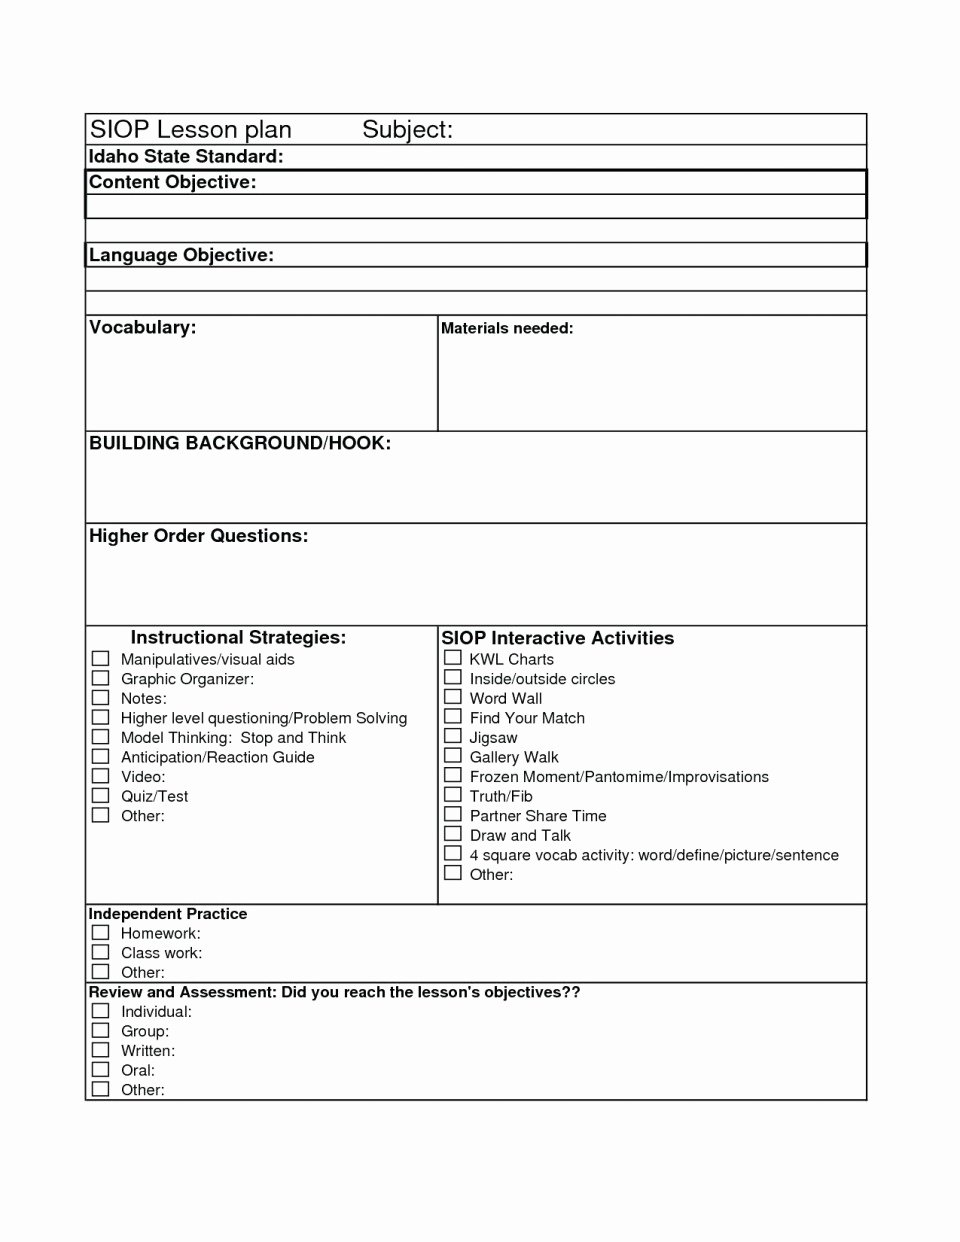 Siop Lesson Plan Template 3 Beautiful 020 Siop Model Lesson Plan Template Gcu Tinypetition